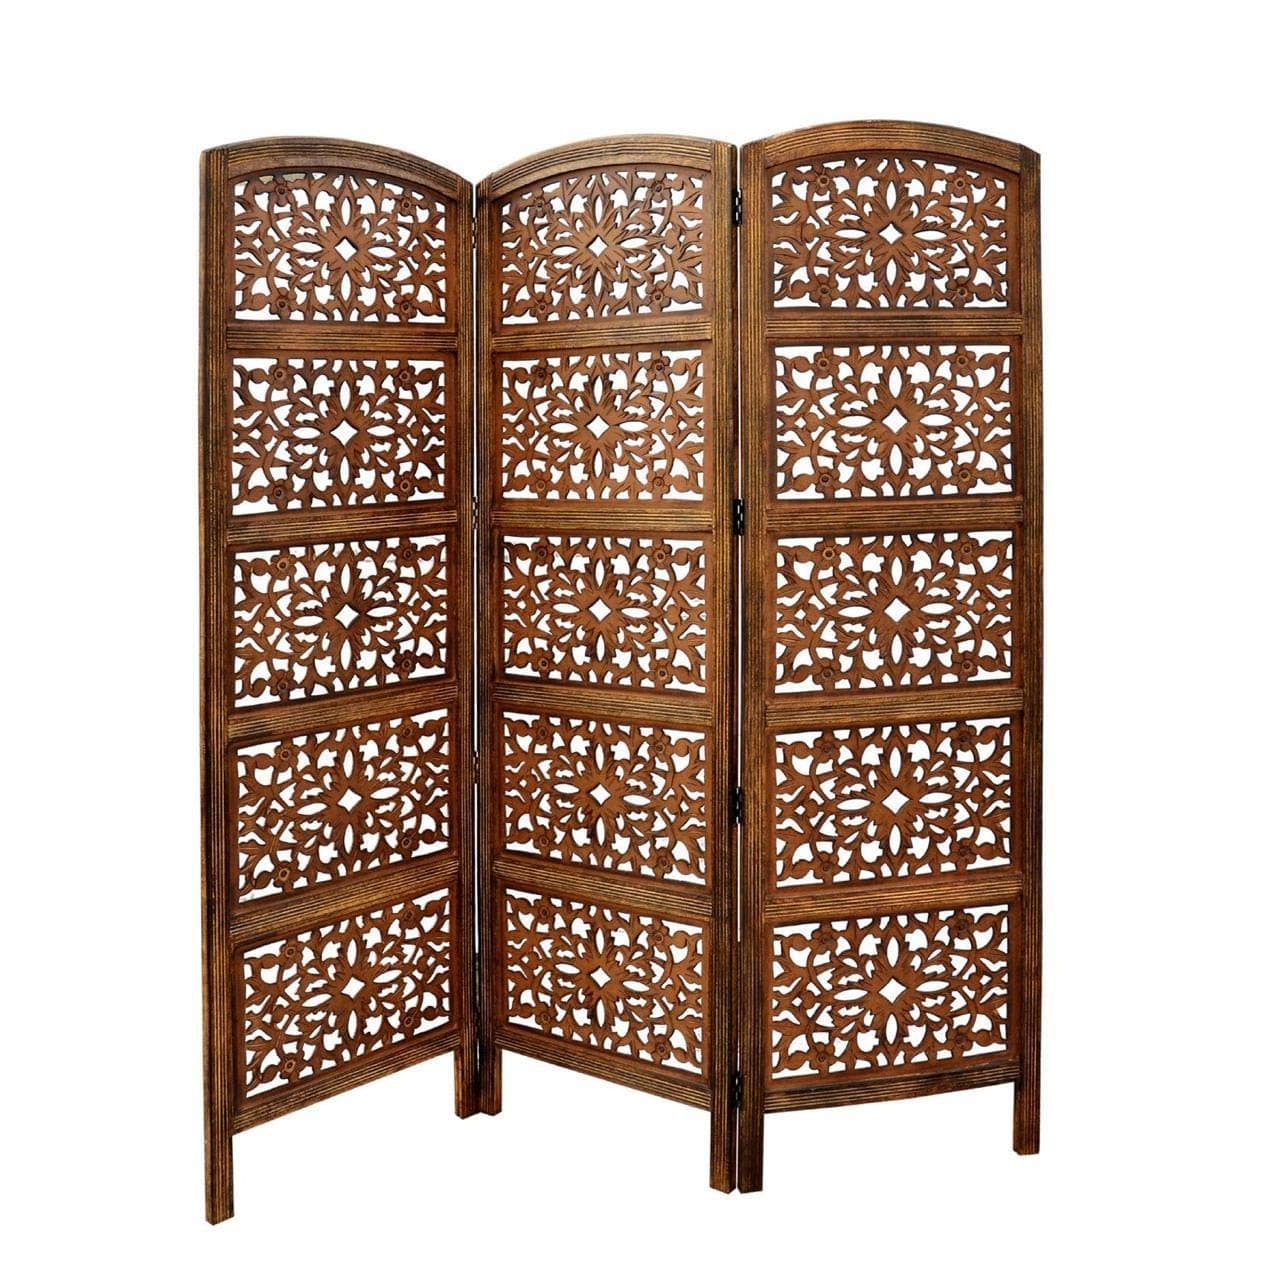 3 Panel Wooden Partition | Room dividers | Wooden Room Separators for Living Area